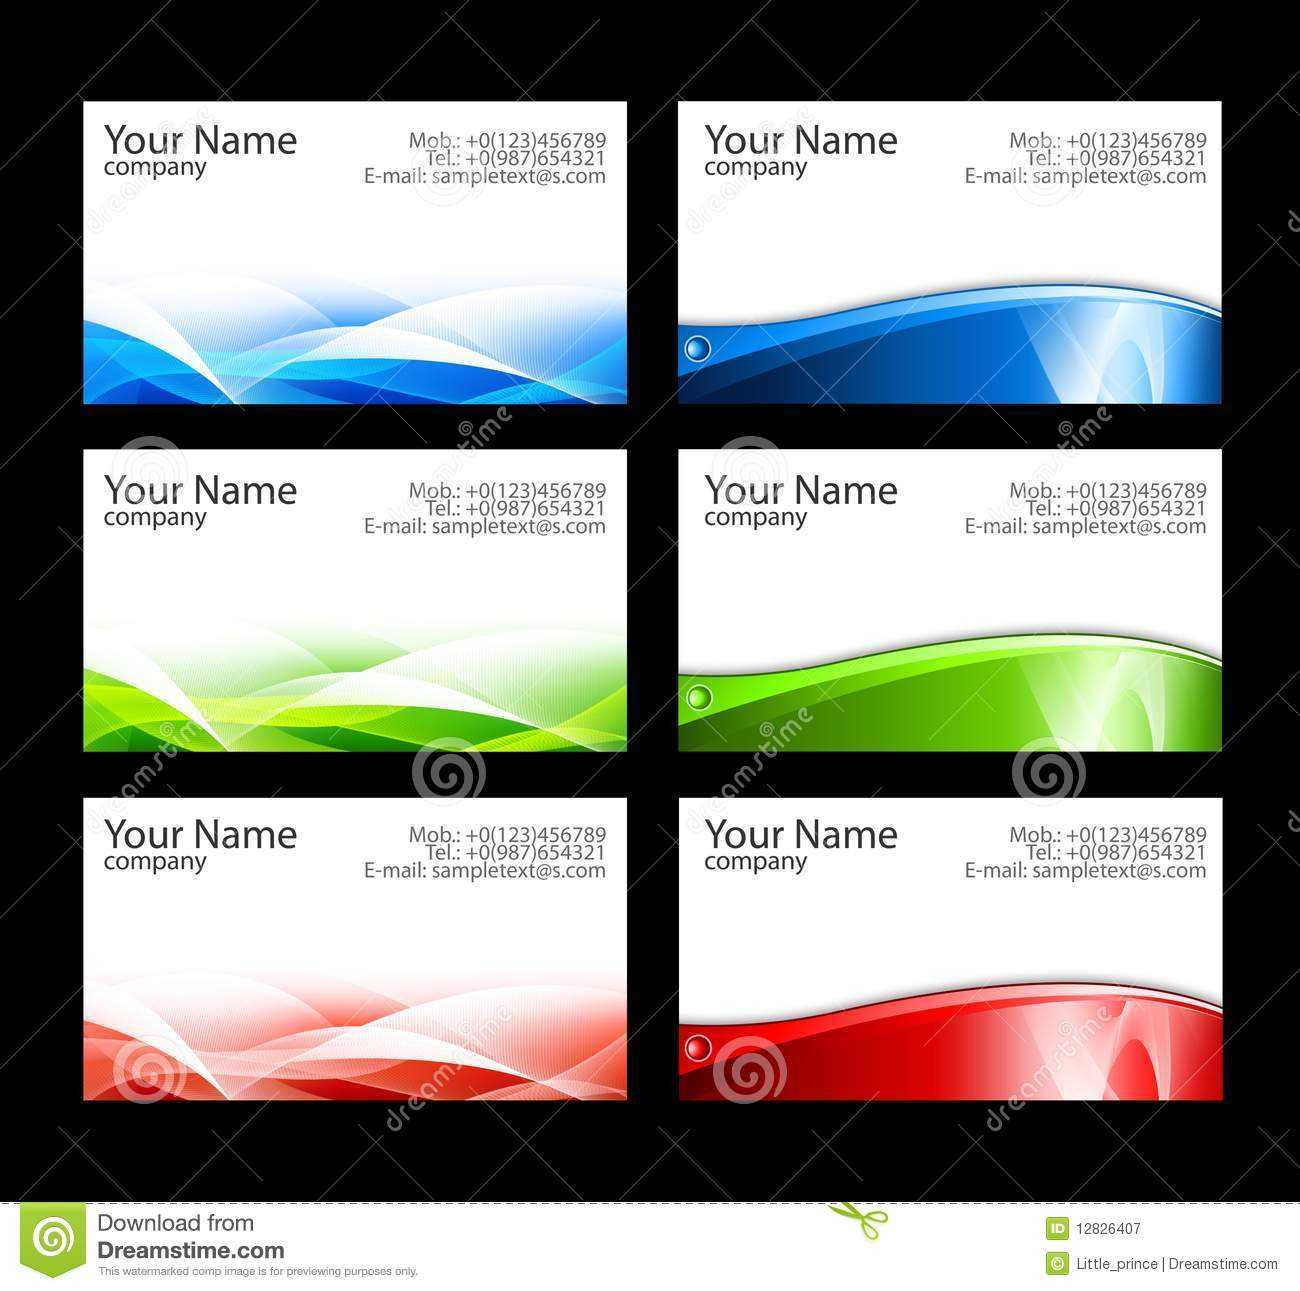 Free Calling Card Template Download – Tunu.redmini.co Inside Free Template Business Cards To Print